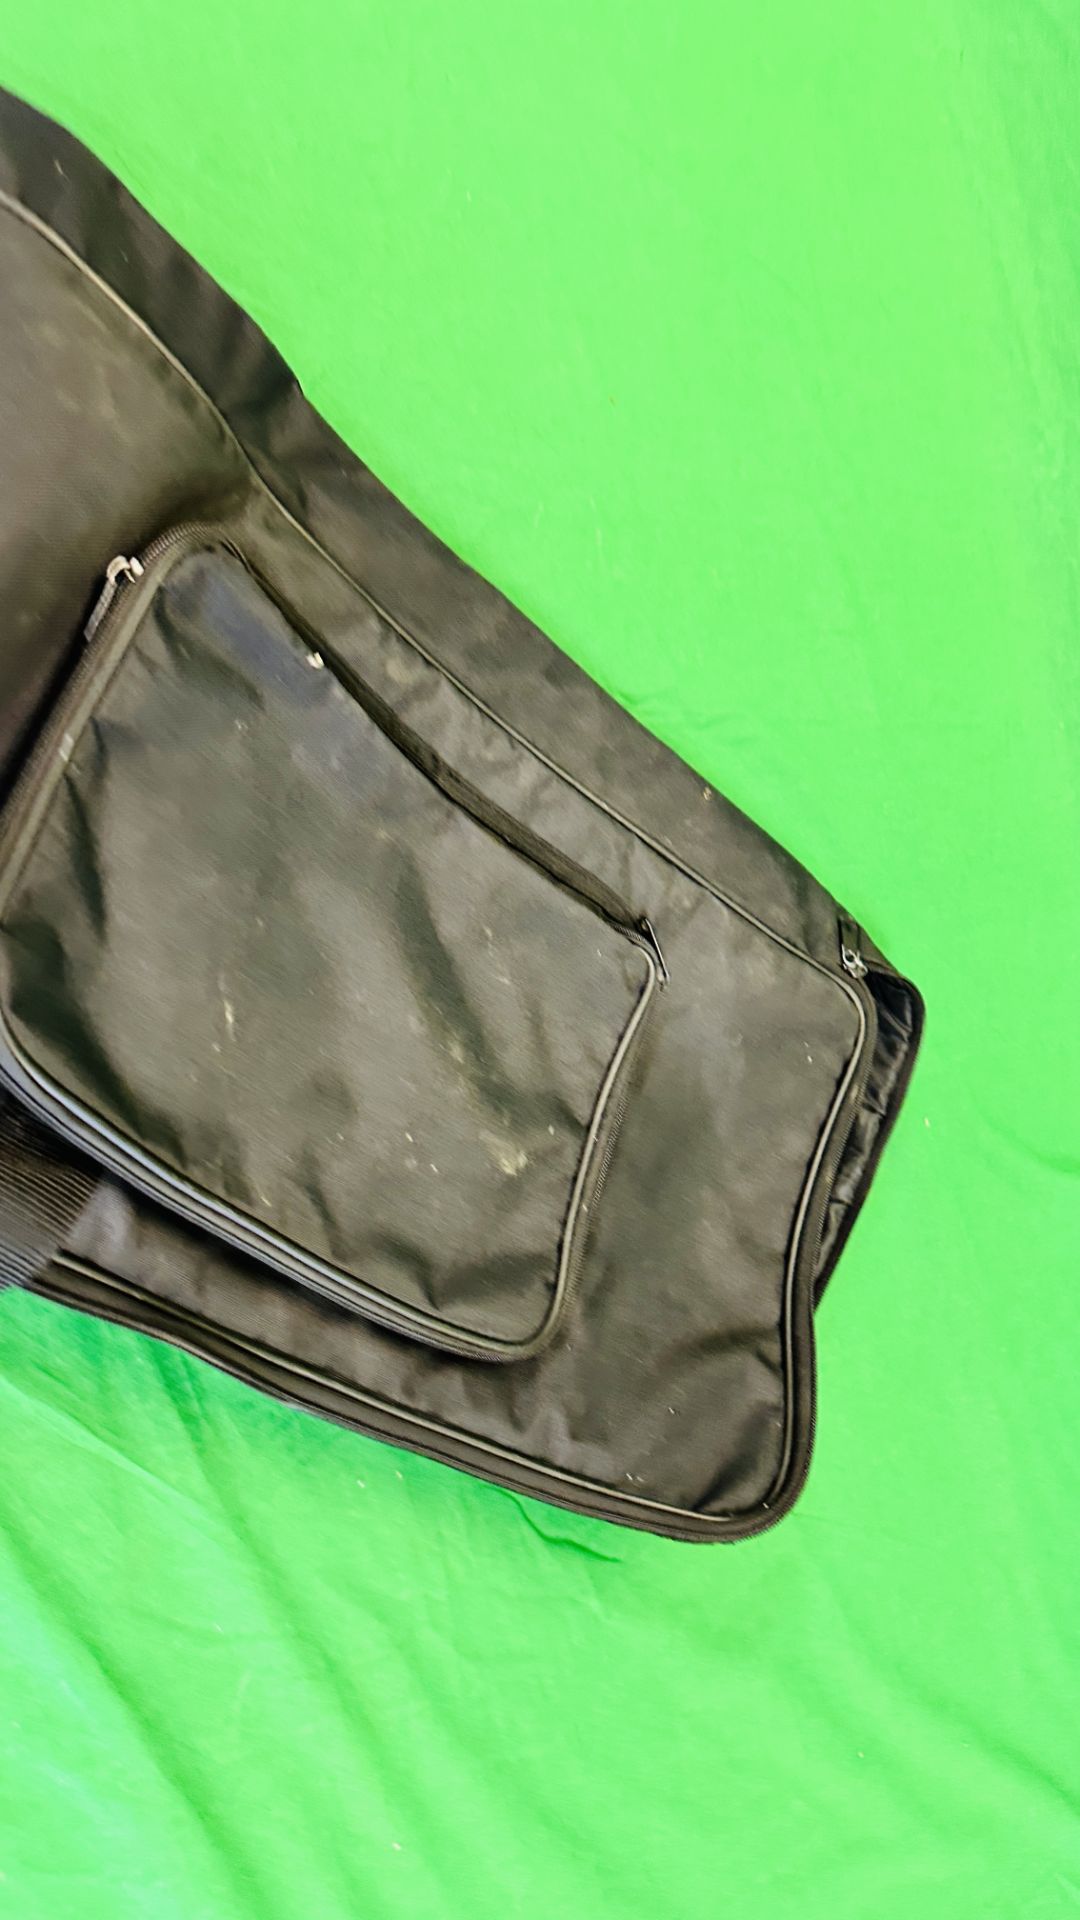 SWISS ARMS TACTICAL RIFLE BAG - Image 4 of 6